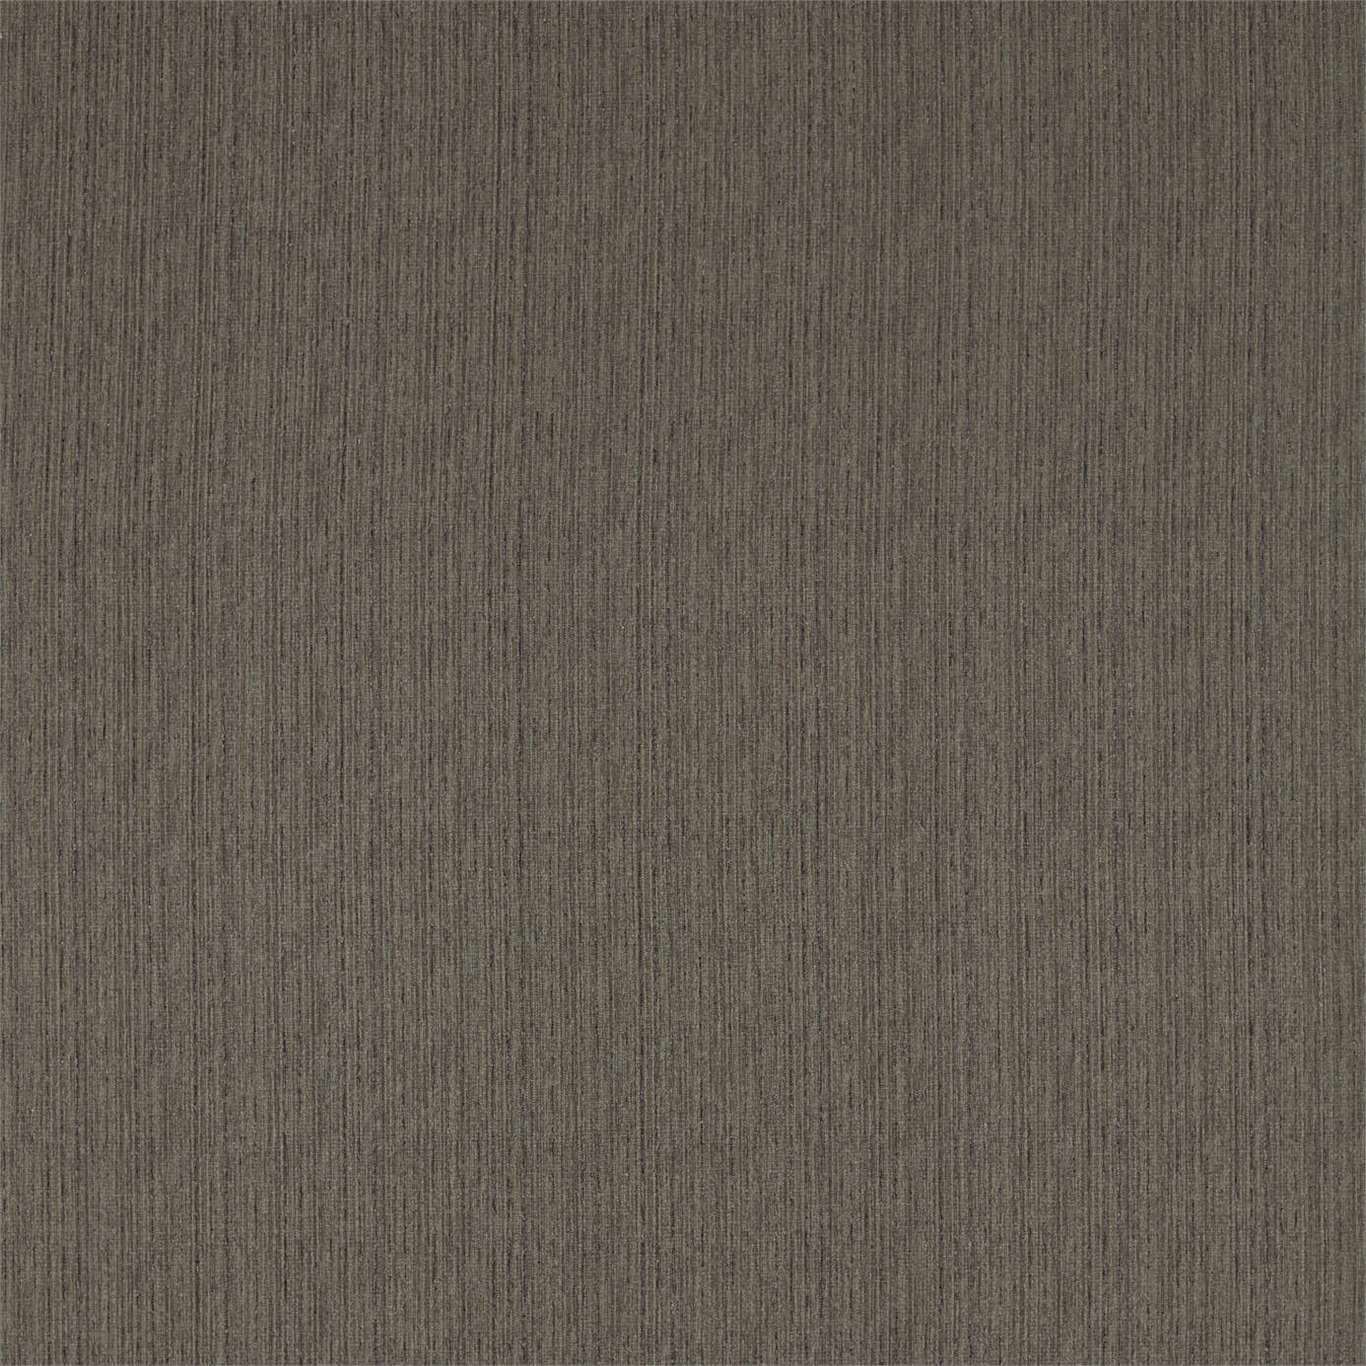 Spindlestone Charcoal Fabric by SAN